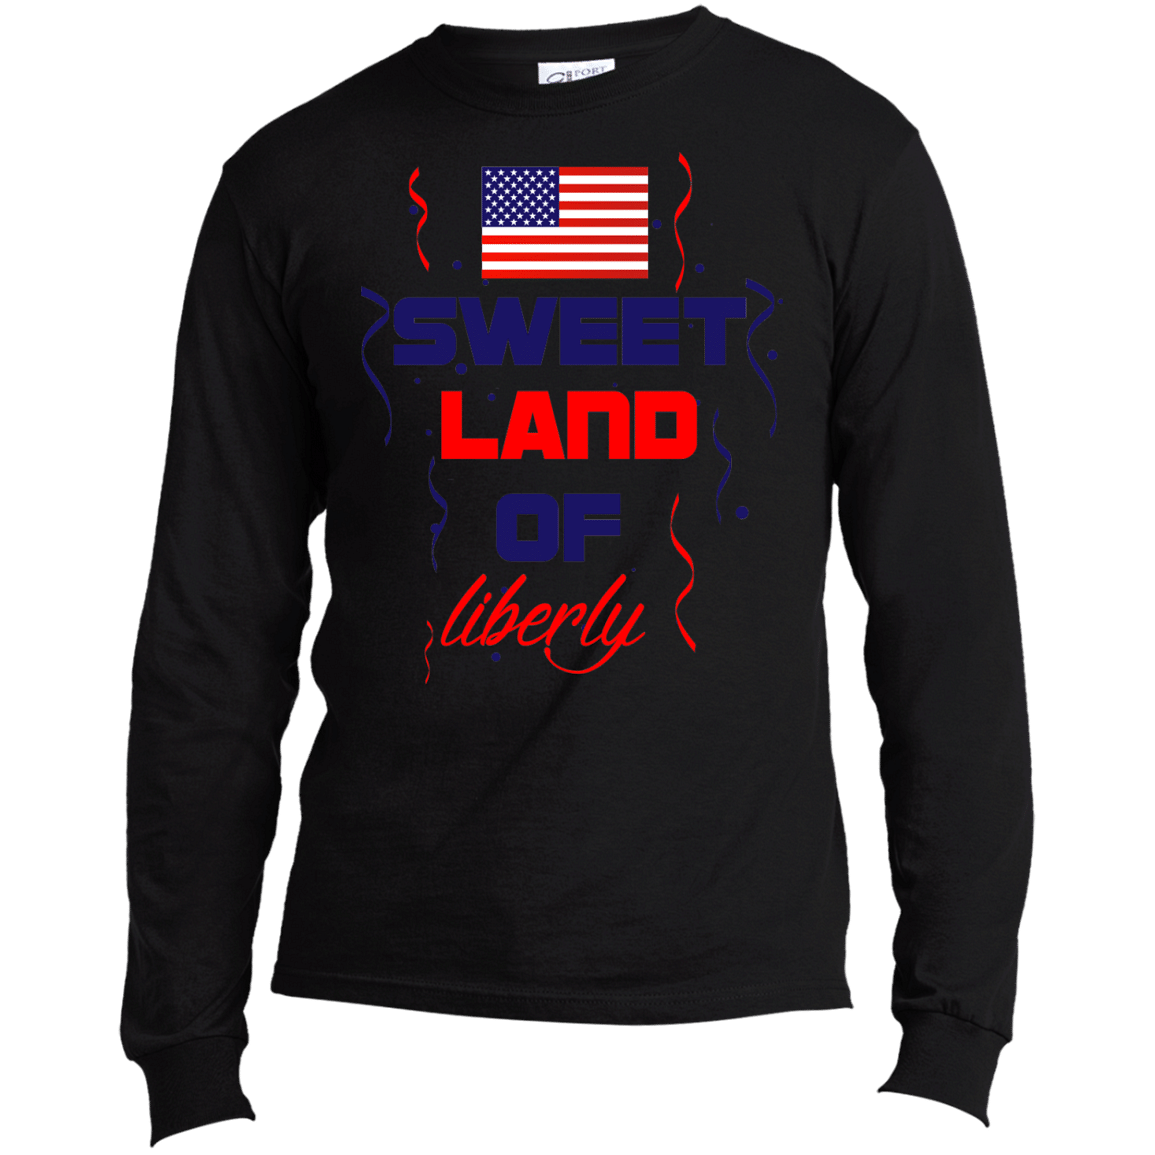 USA100LS Long Sleeve Made in the US T-Shirt